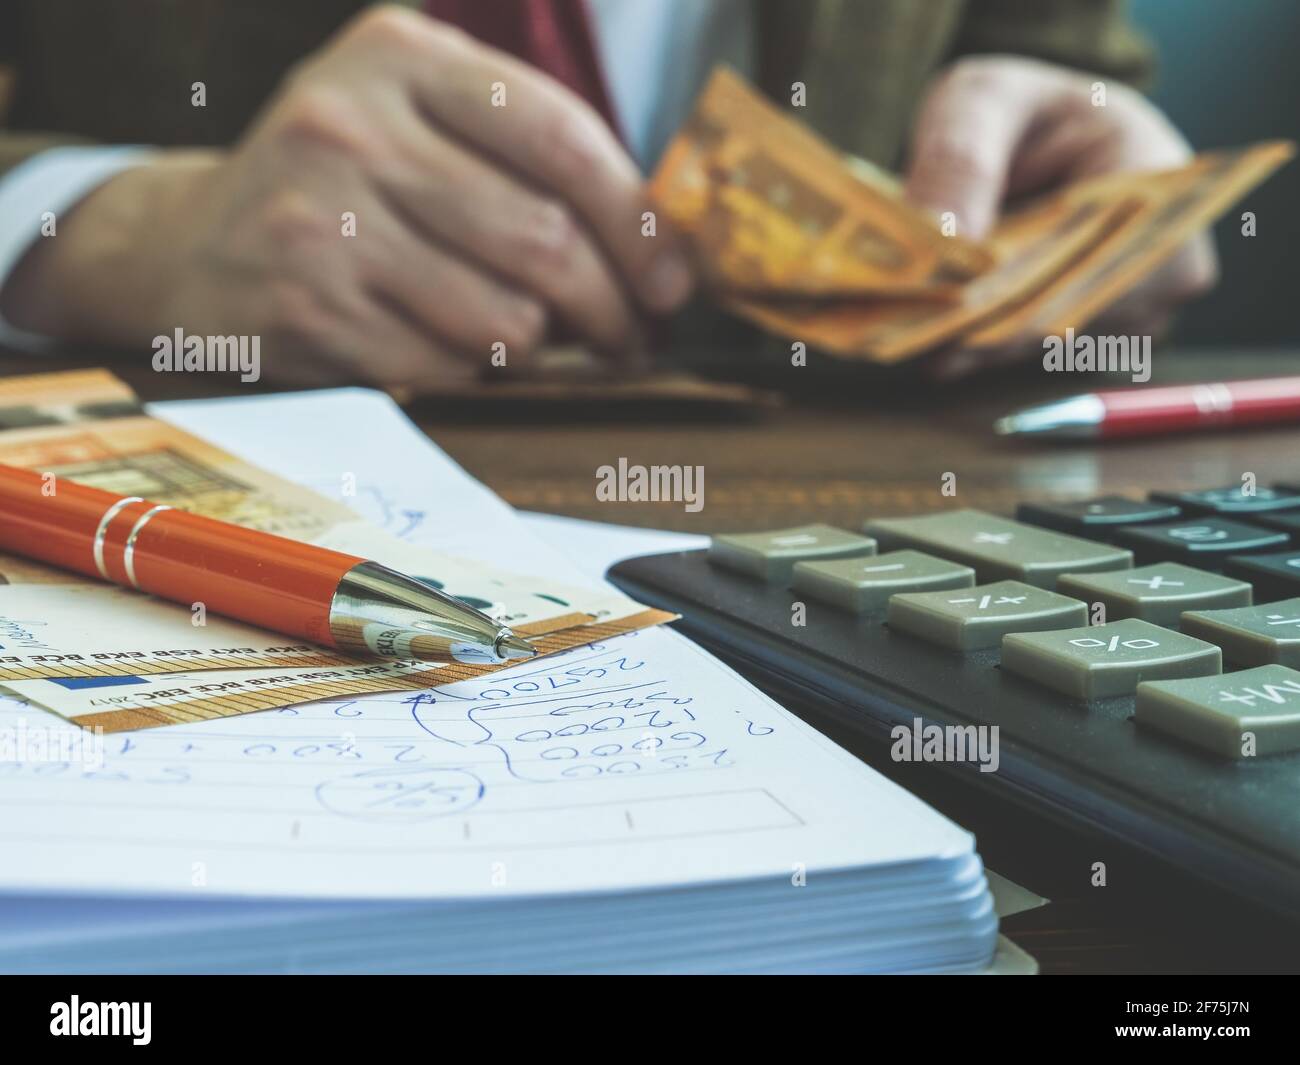 Hands count euro banknotes with calculator and notepad. Stock Photo